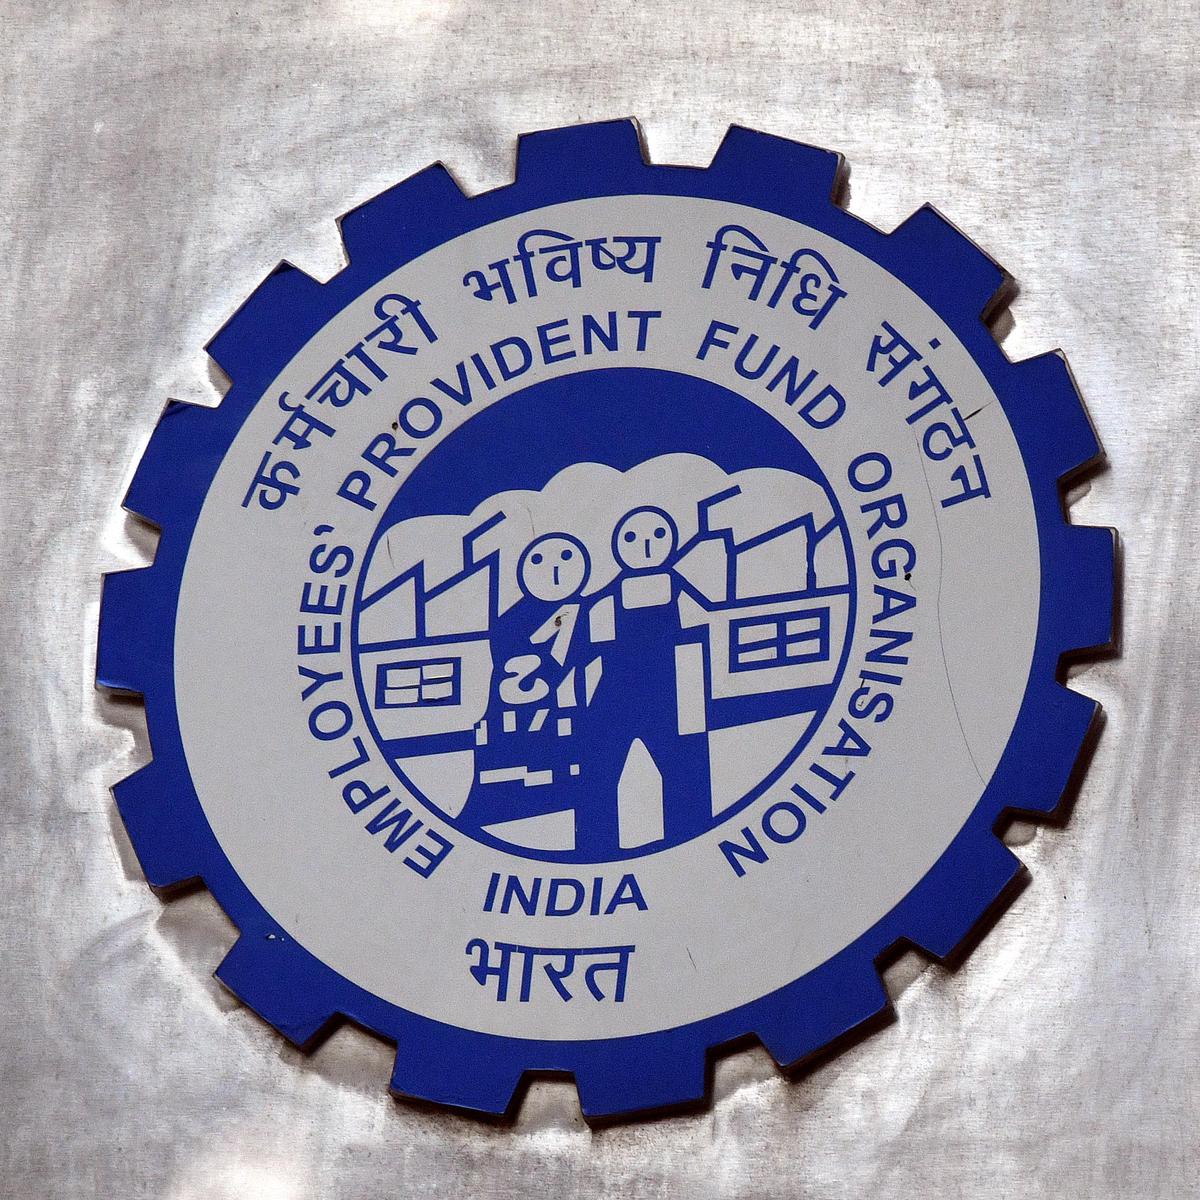 Now workers can generate UAN from EPFO portal directly - The Economic Times